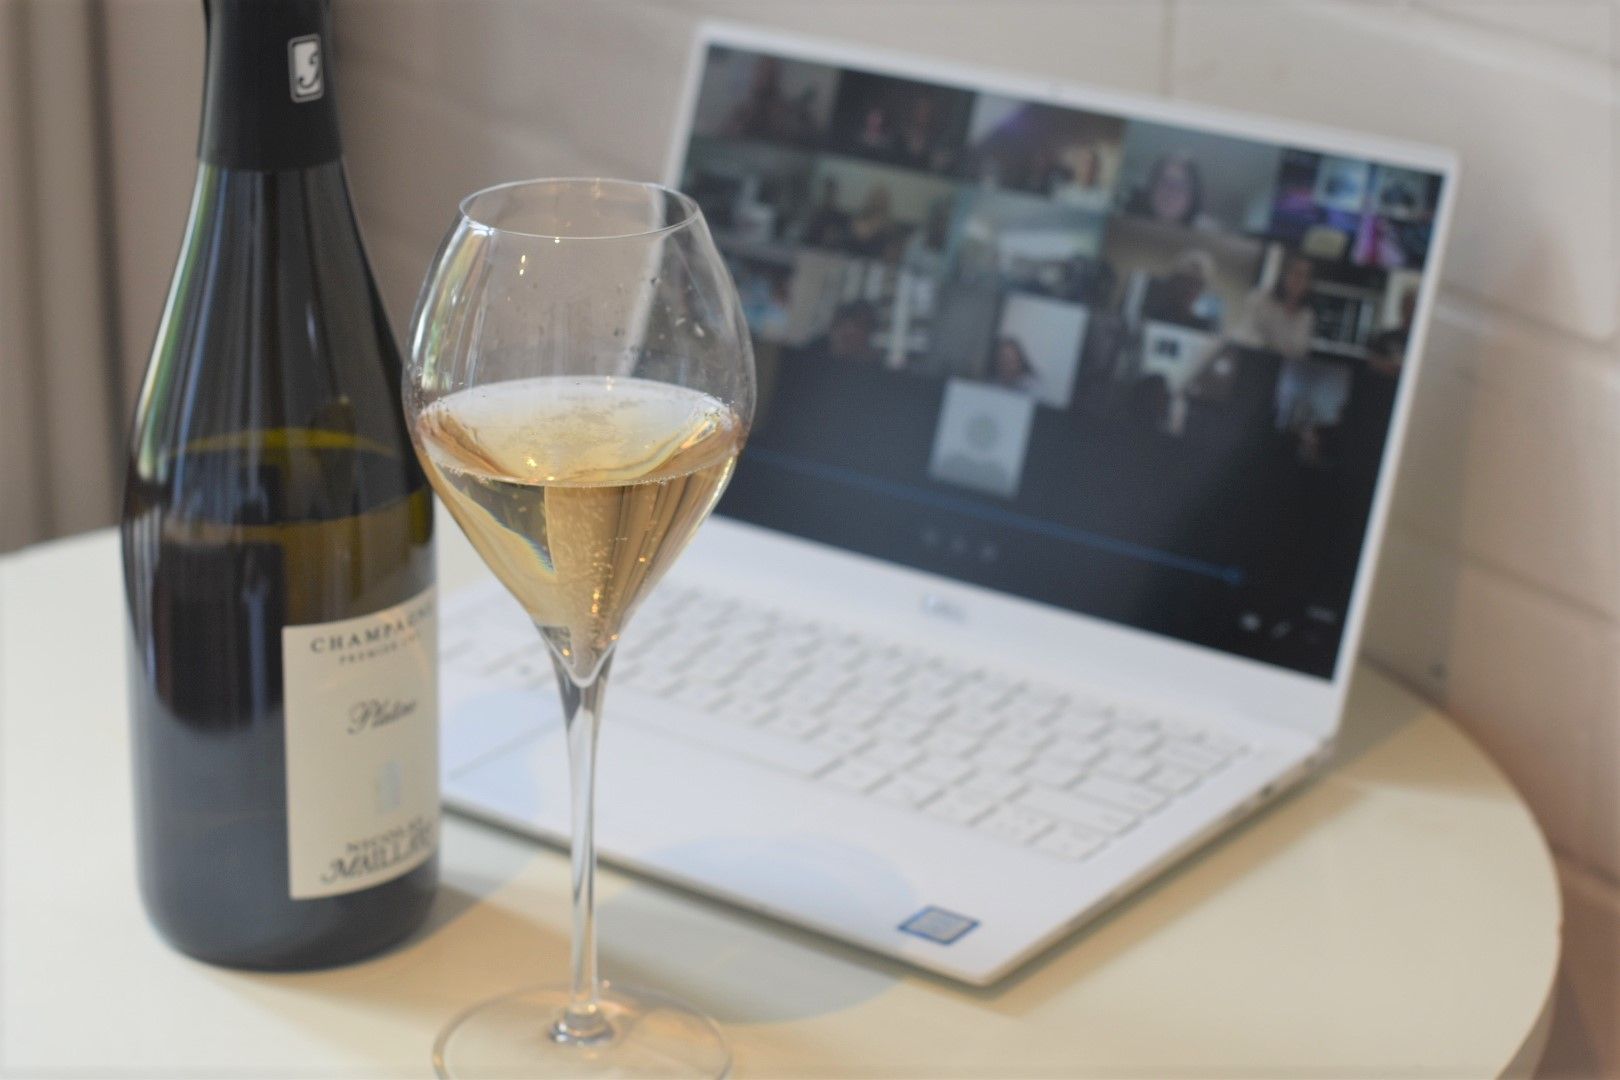 How much real value is there in virtual Champagne tasting?